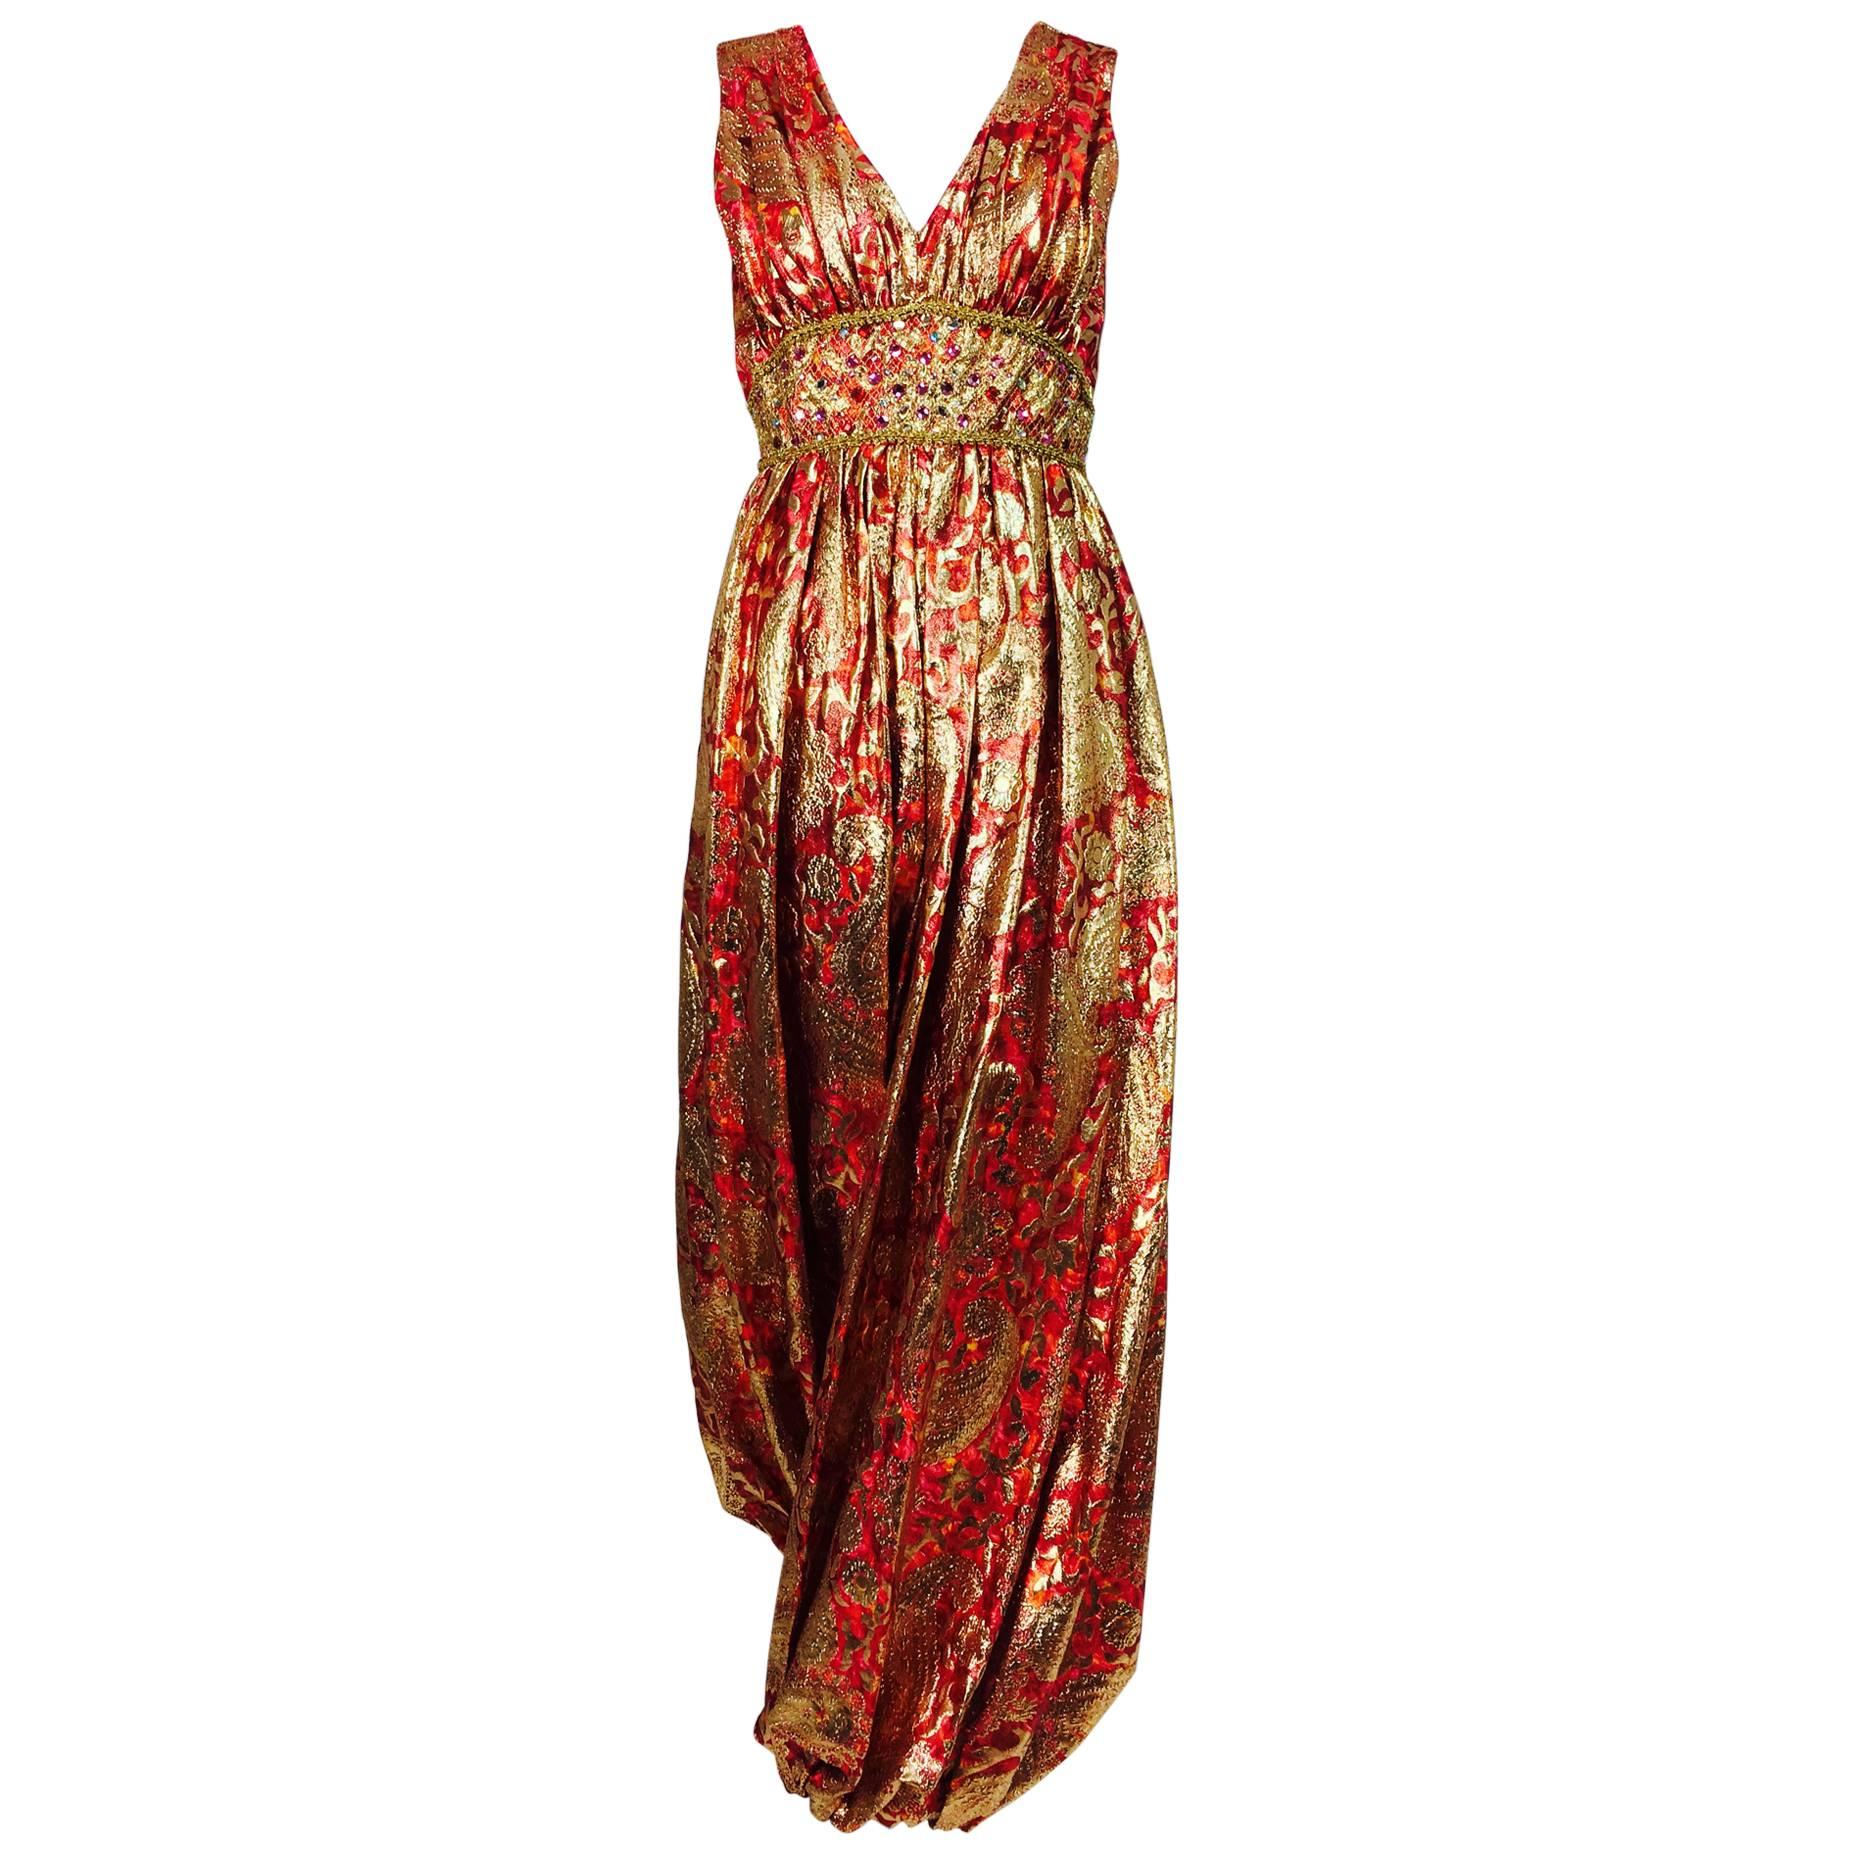 Malcolm Starr jeweled coral and gold metallic lame harem jumpsuit 1970s